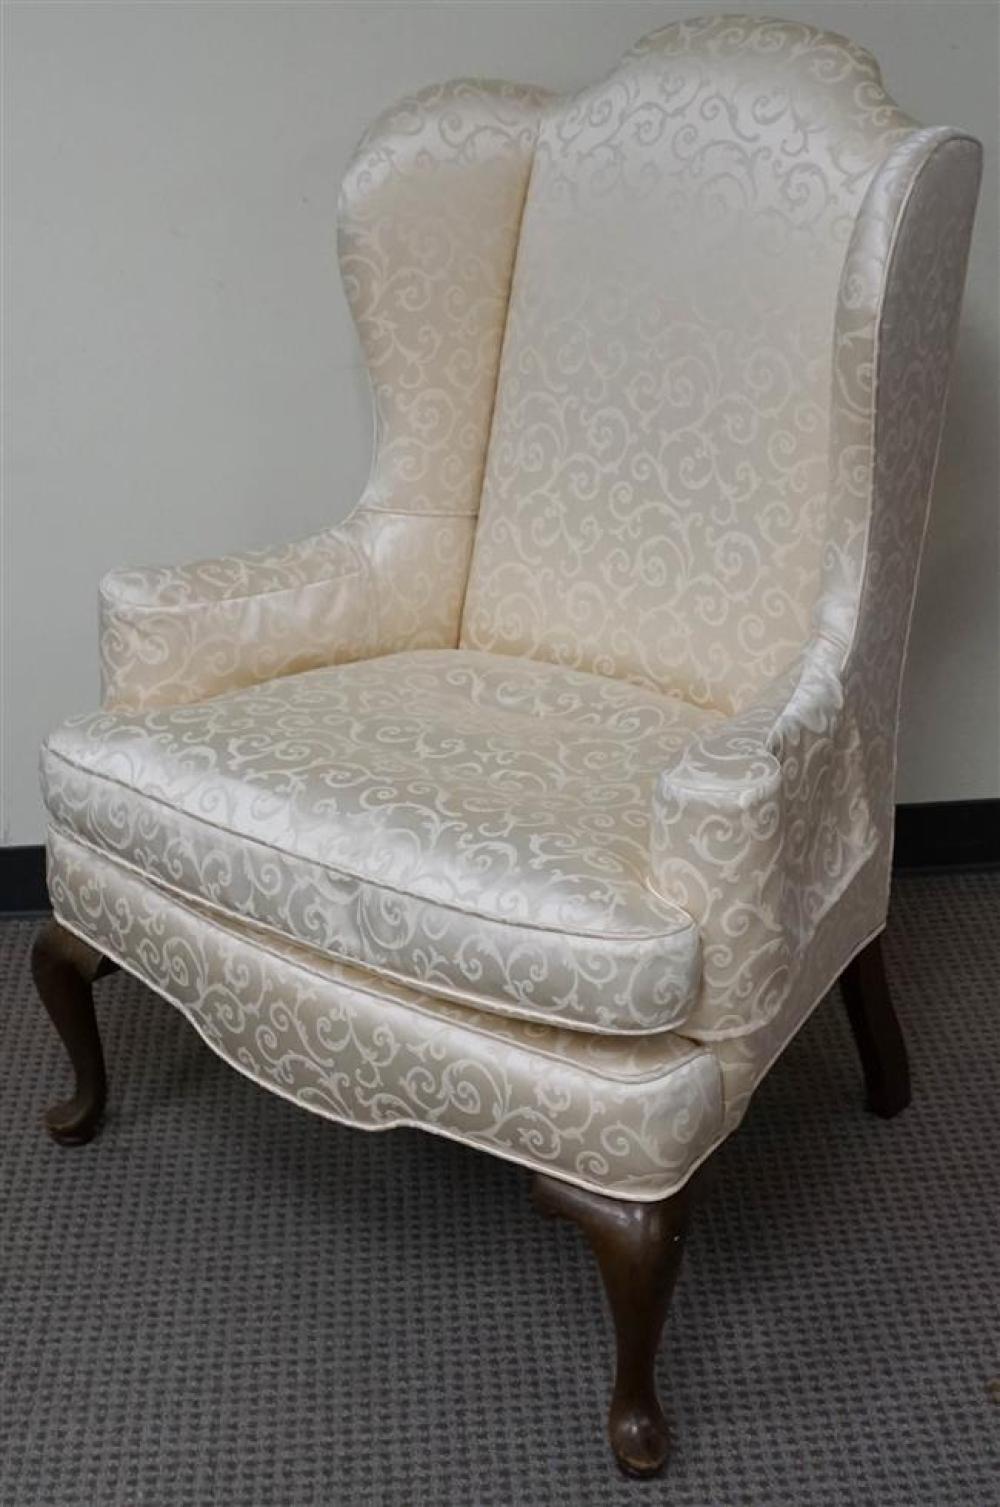 QUEEN ANNE STYLE UPHOLSTERED WING 32489c